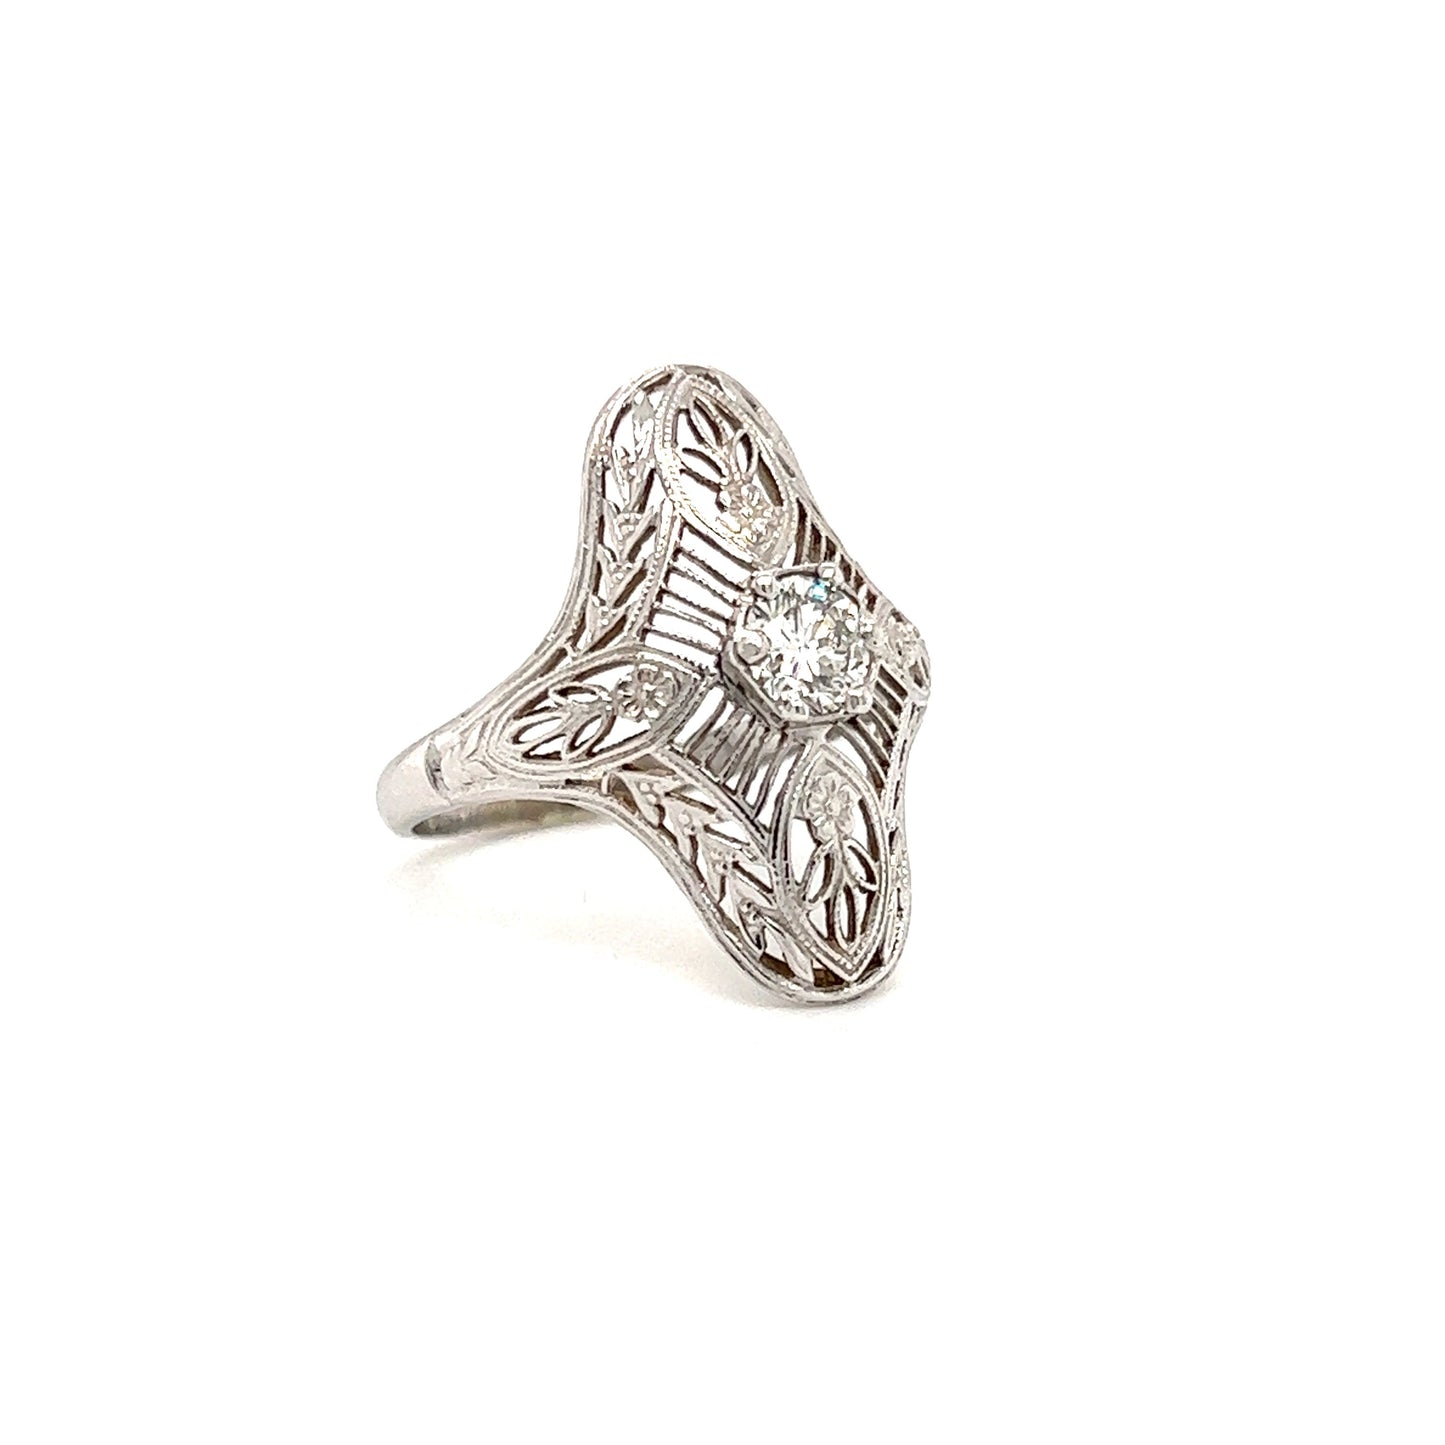 Round Diamond Ring with Filigree in 14K White Gold Left Side View